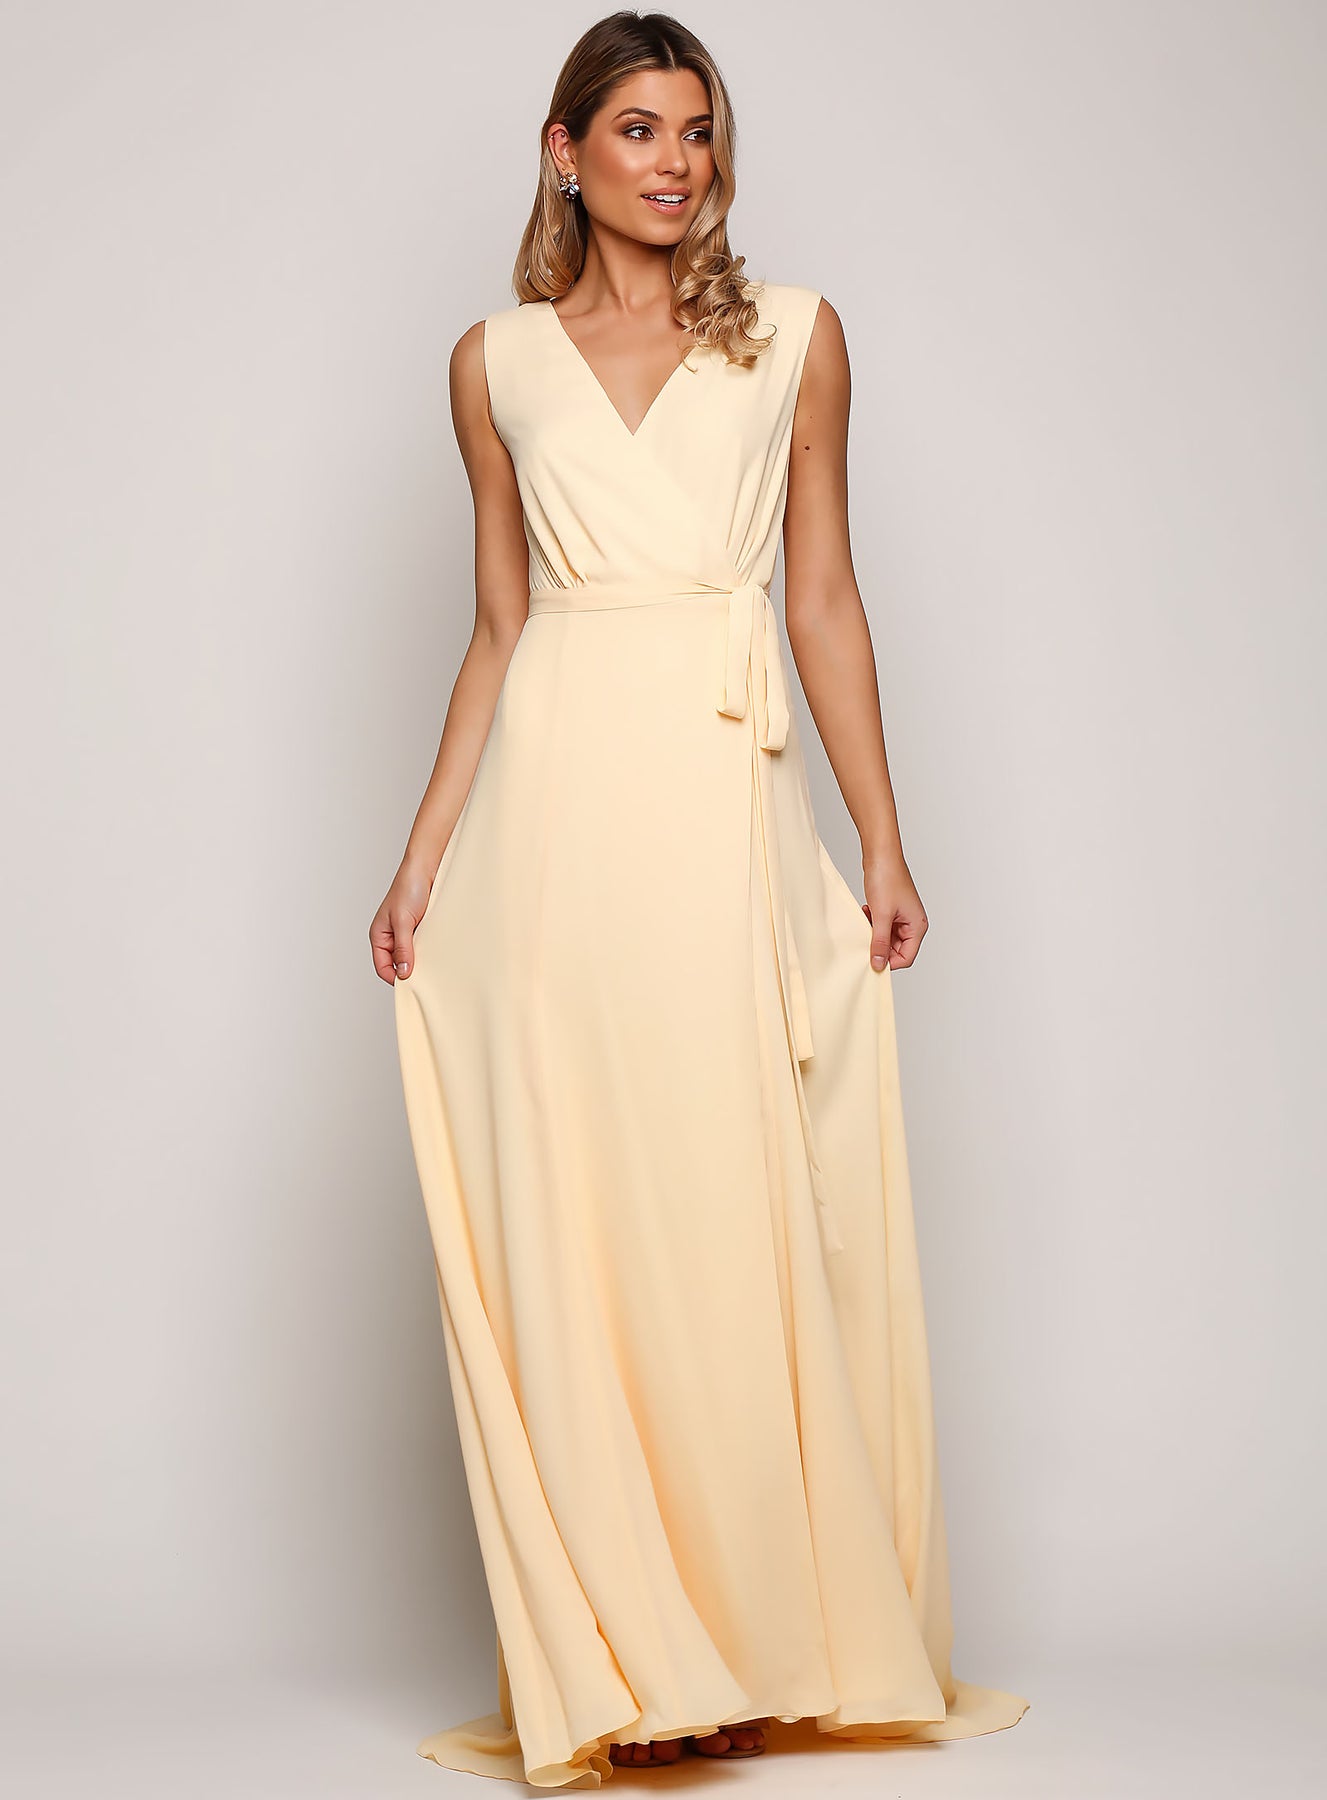 Sleeveless Wrap Gown by Samantha Rose ...